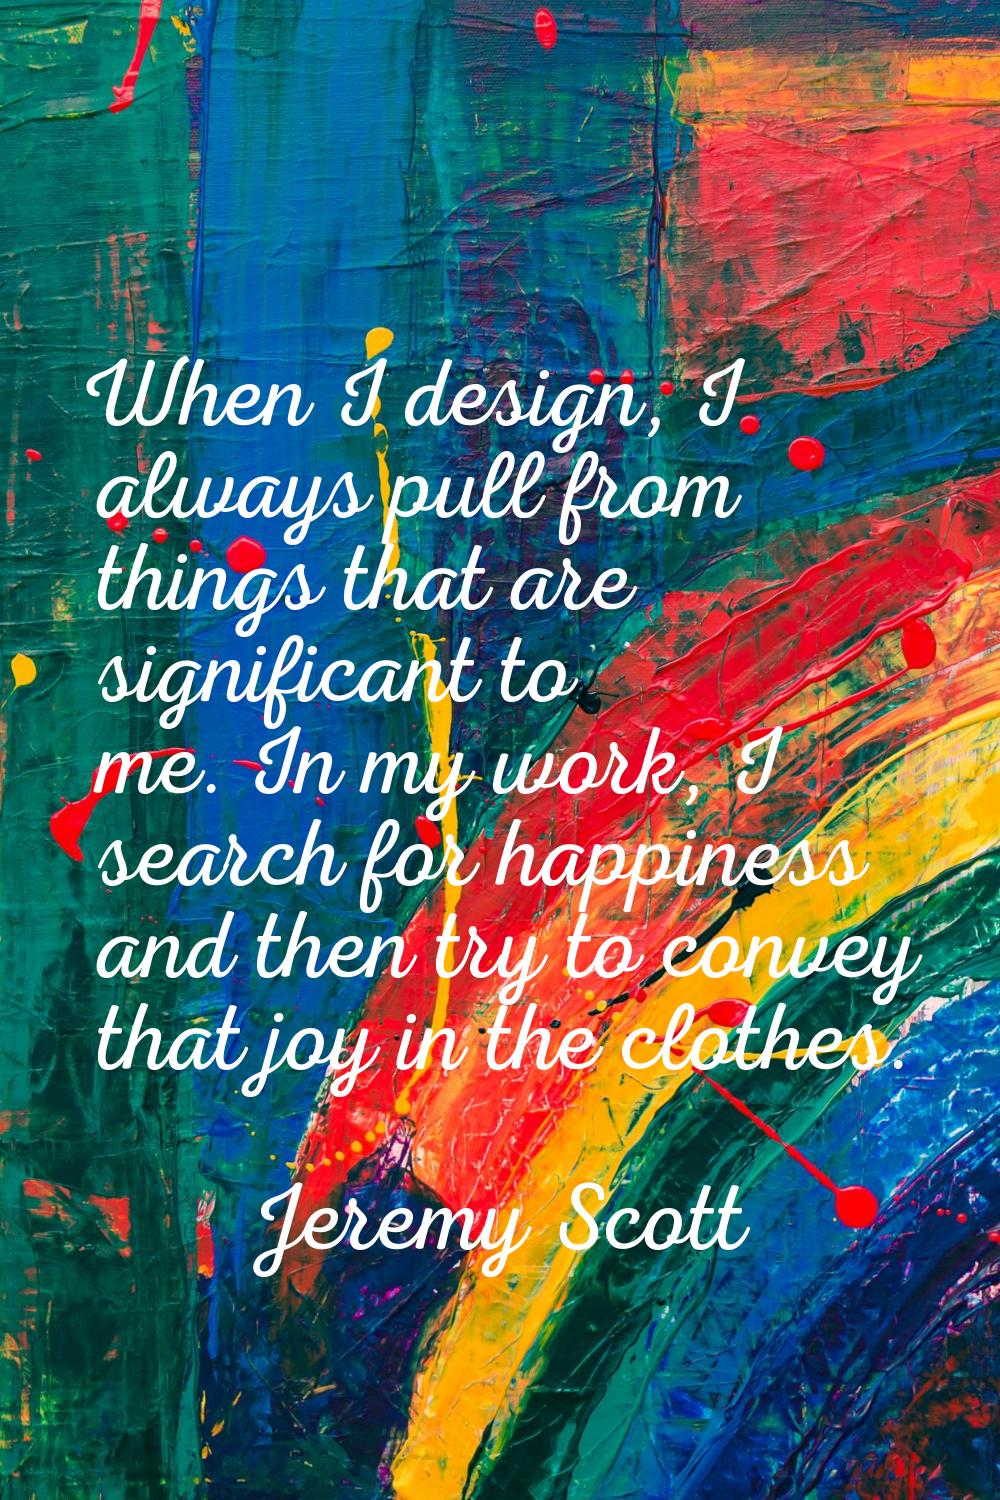 When I design, I always pull from things that are significant to me. In my work, I search for happi